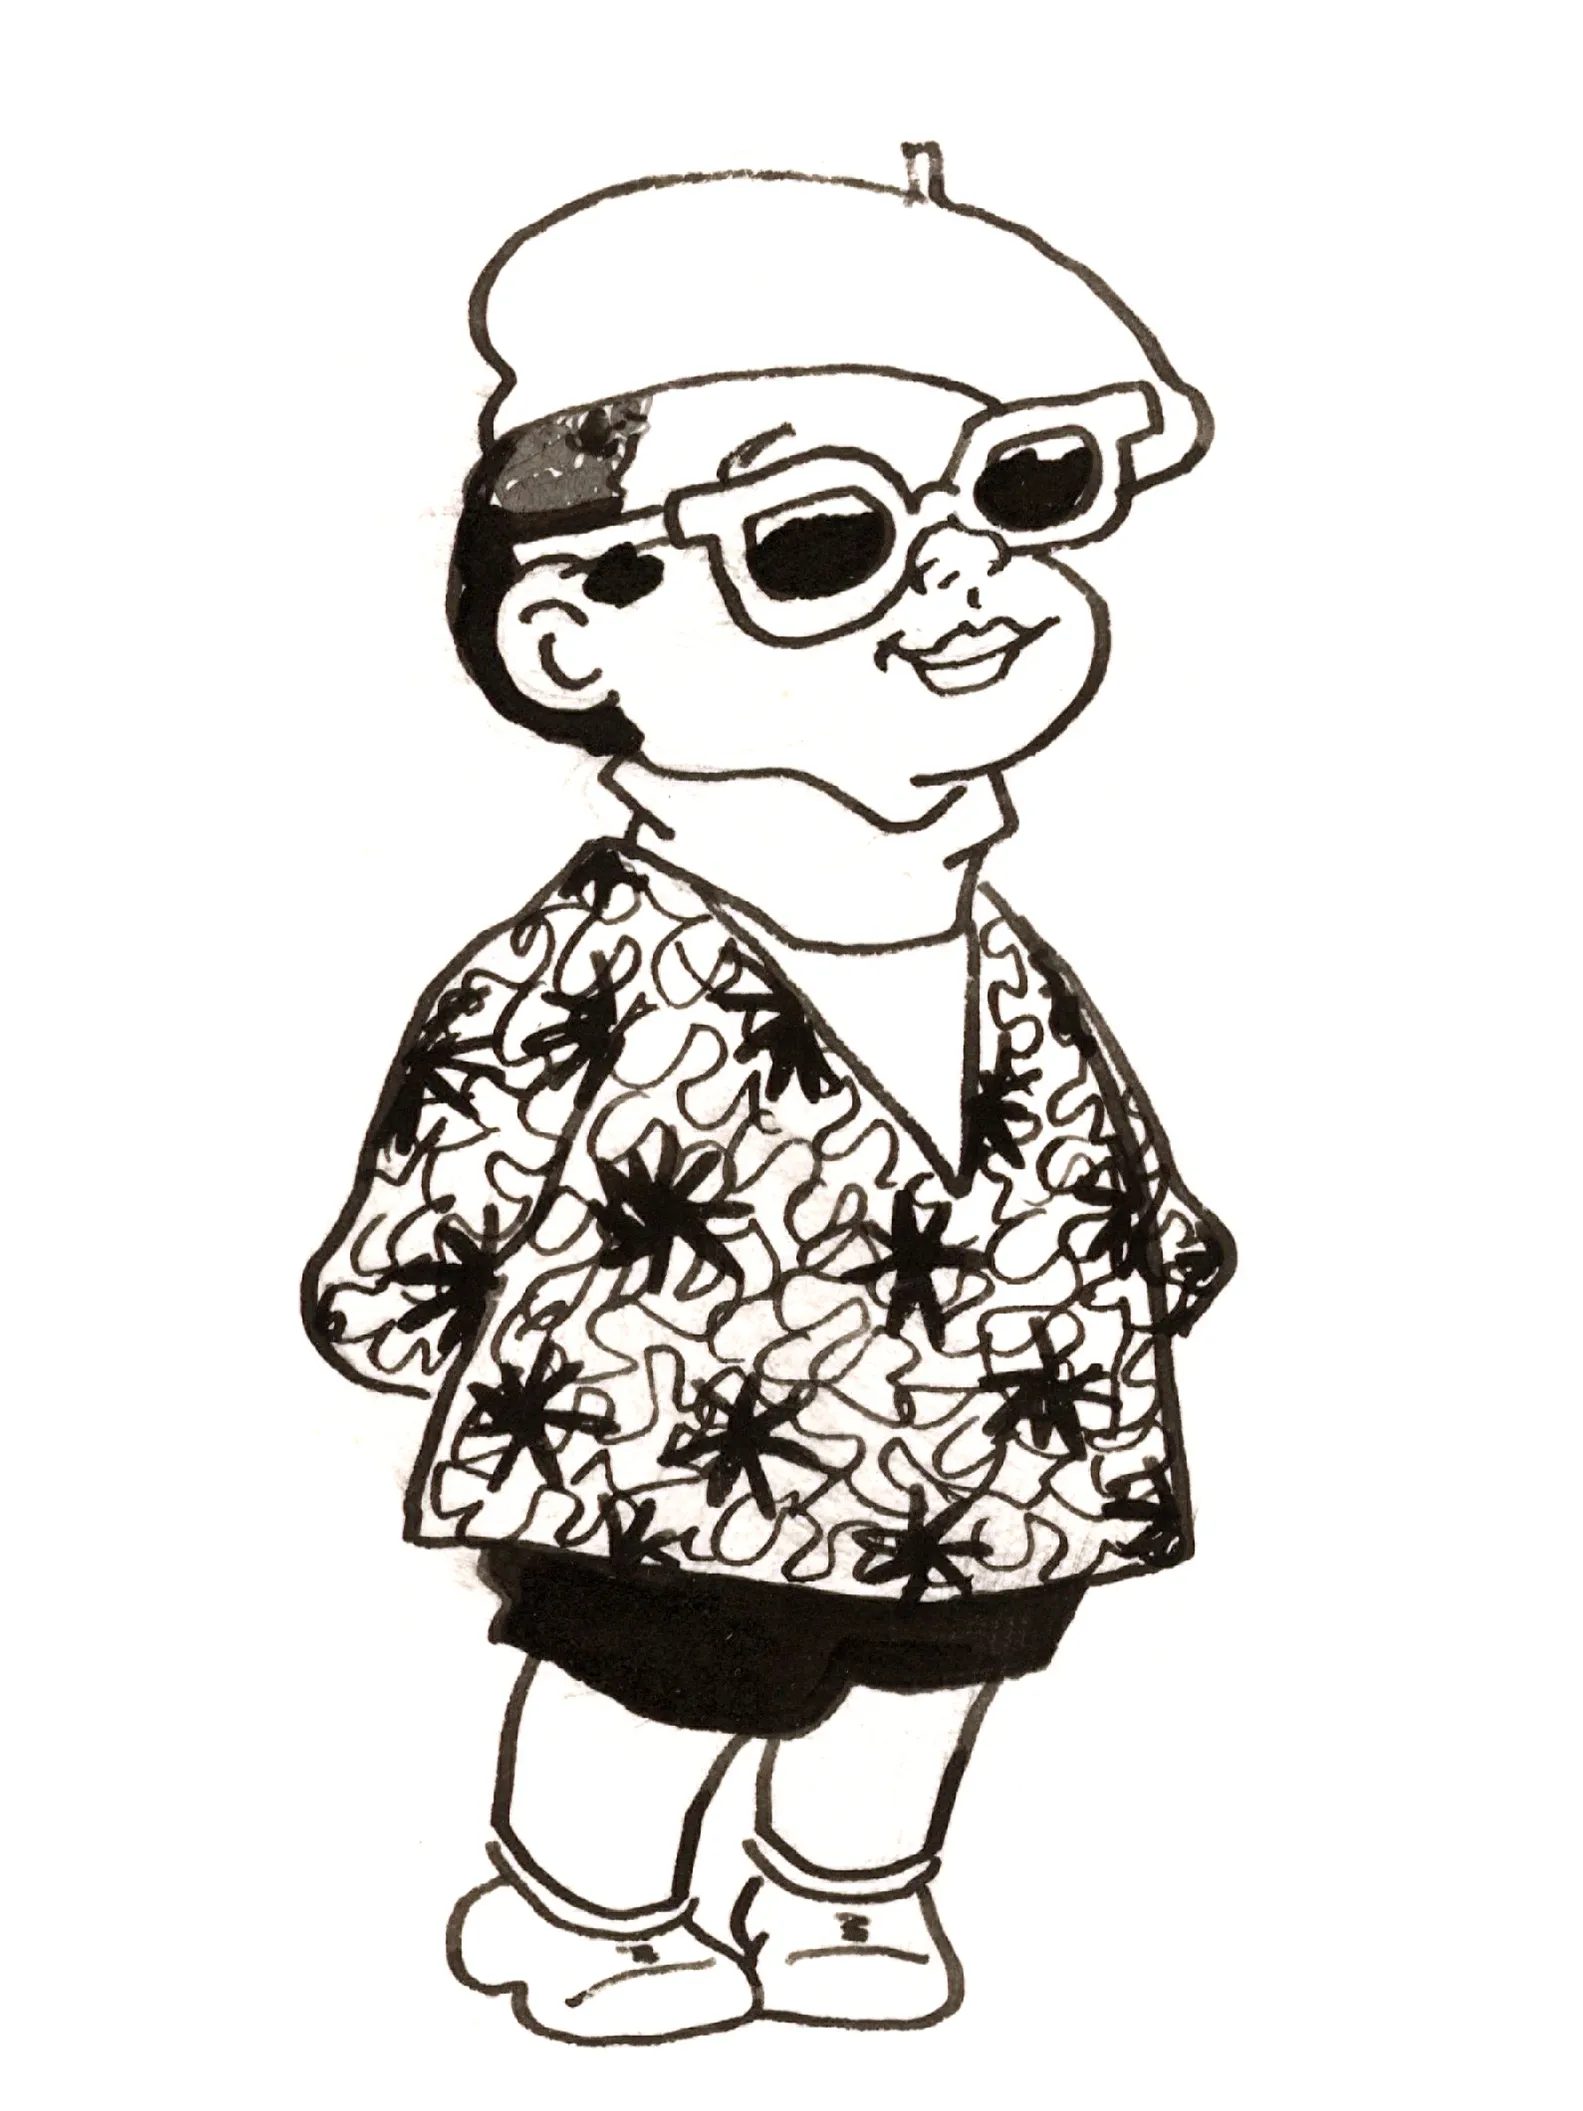 A black and white drawing shows a young girl wearing sunglasses, a beret, a flower shirt and shorts. She has a slight smile and is standing on her toes, slightly leaning forward, with his hands clasped behind his back.